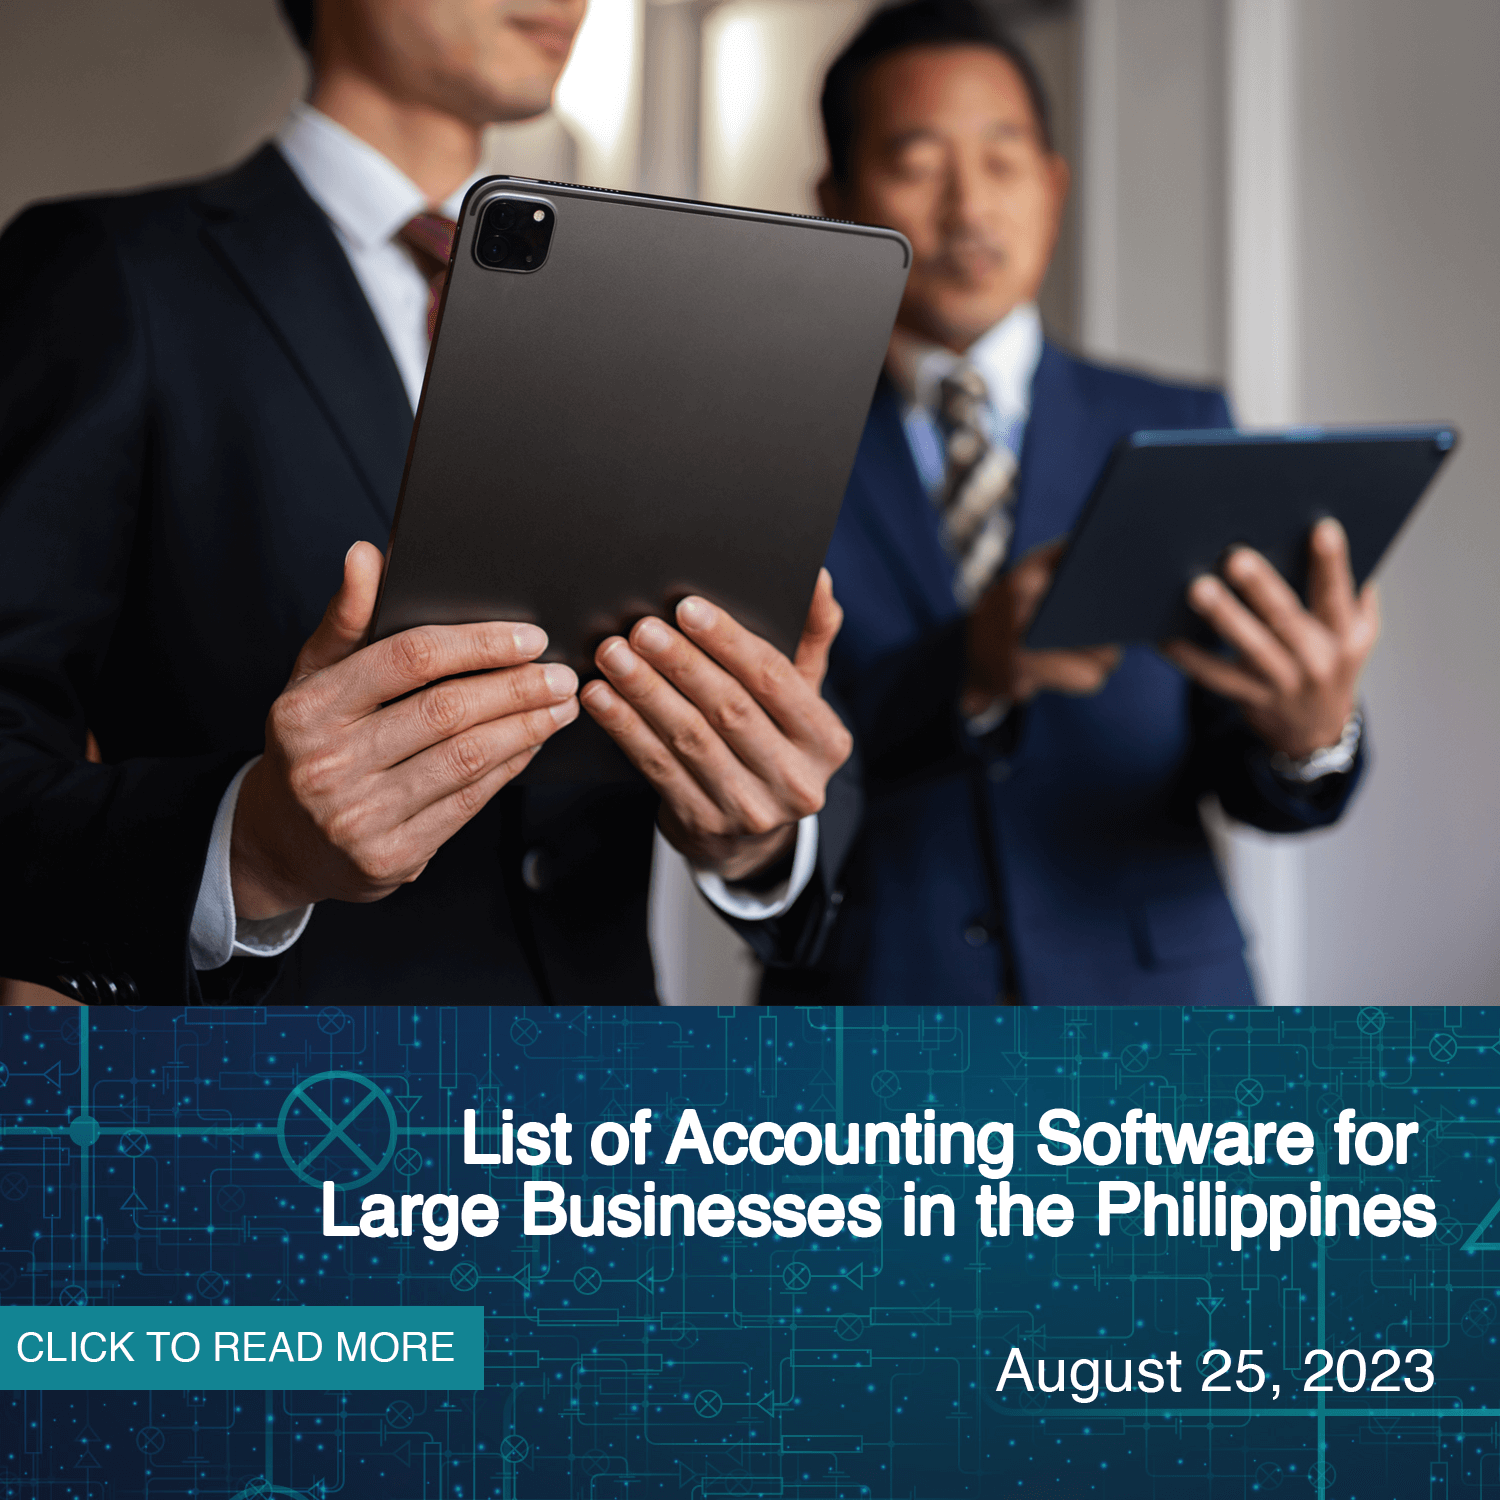 List of Accounting Software for Large Businesses in the Philippines